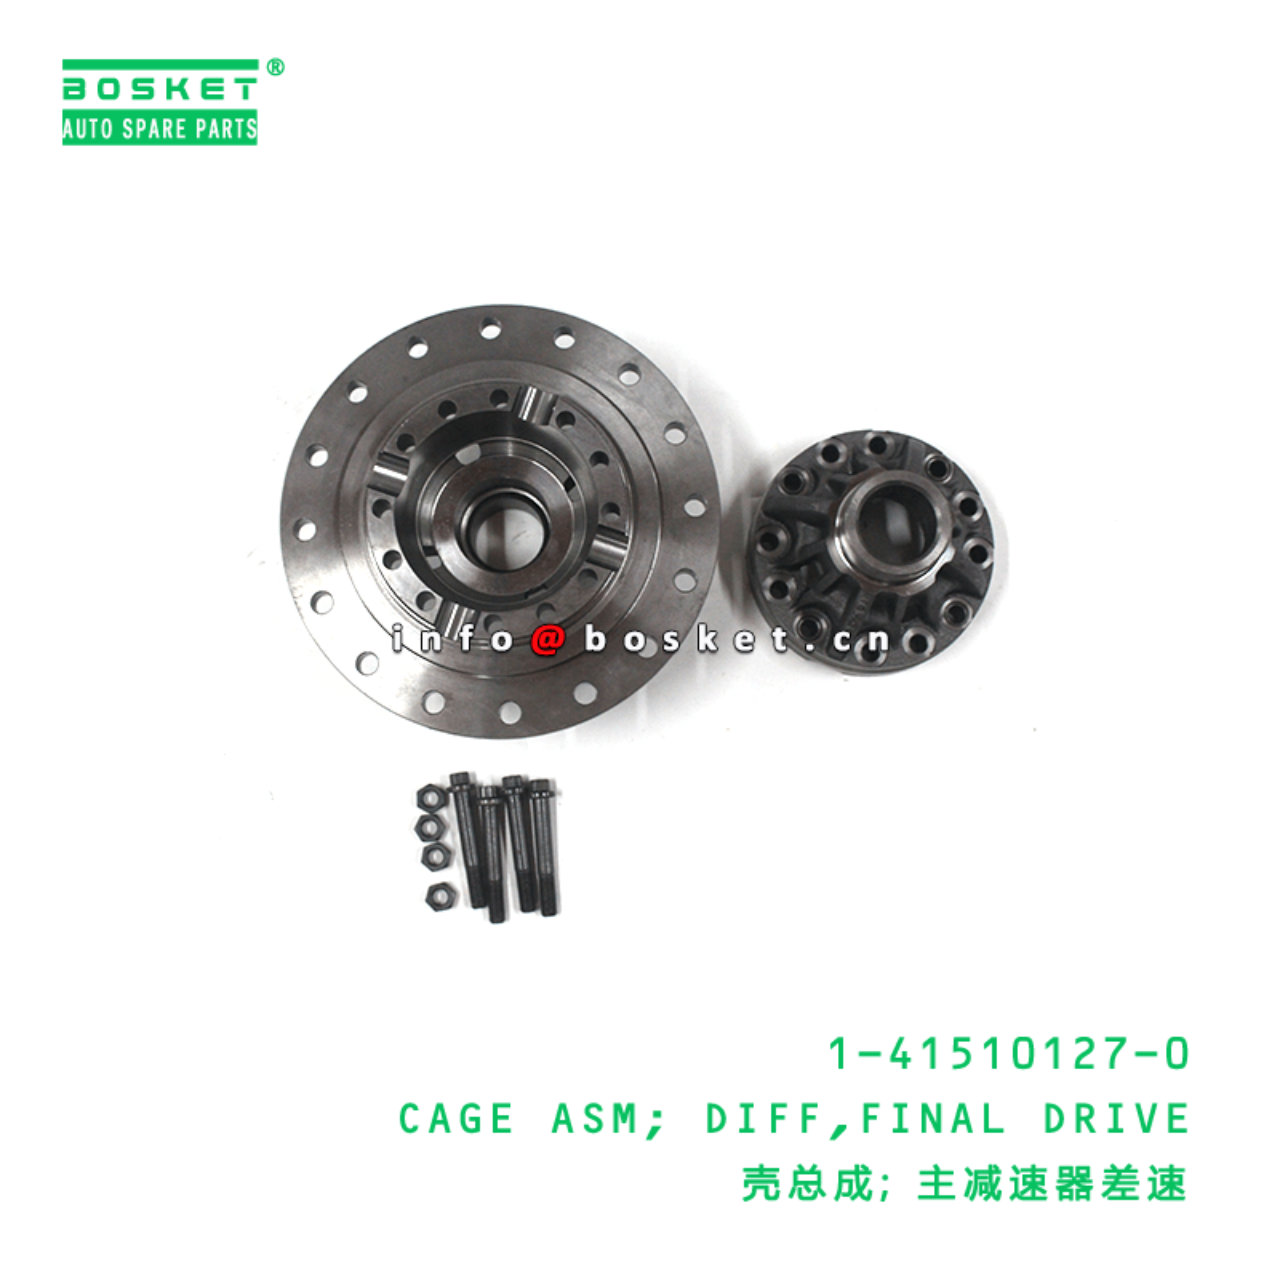 1-41510127-0 Final Drive Differential Cage Assembly1415101270 Suitable for ISUZU XD